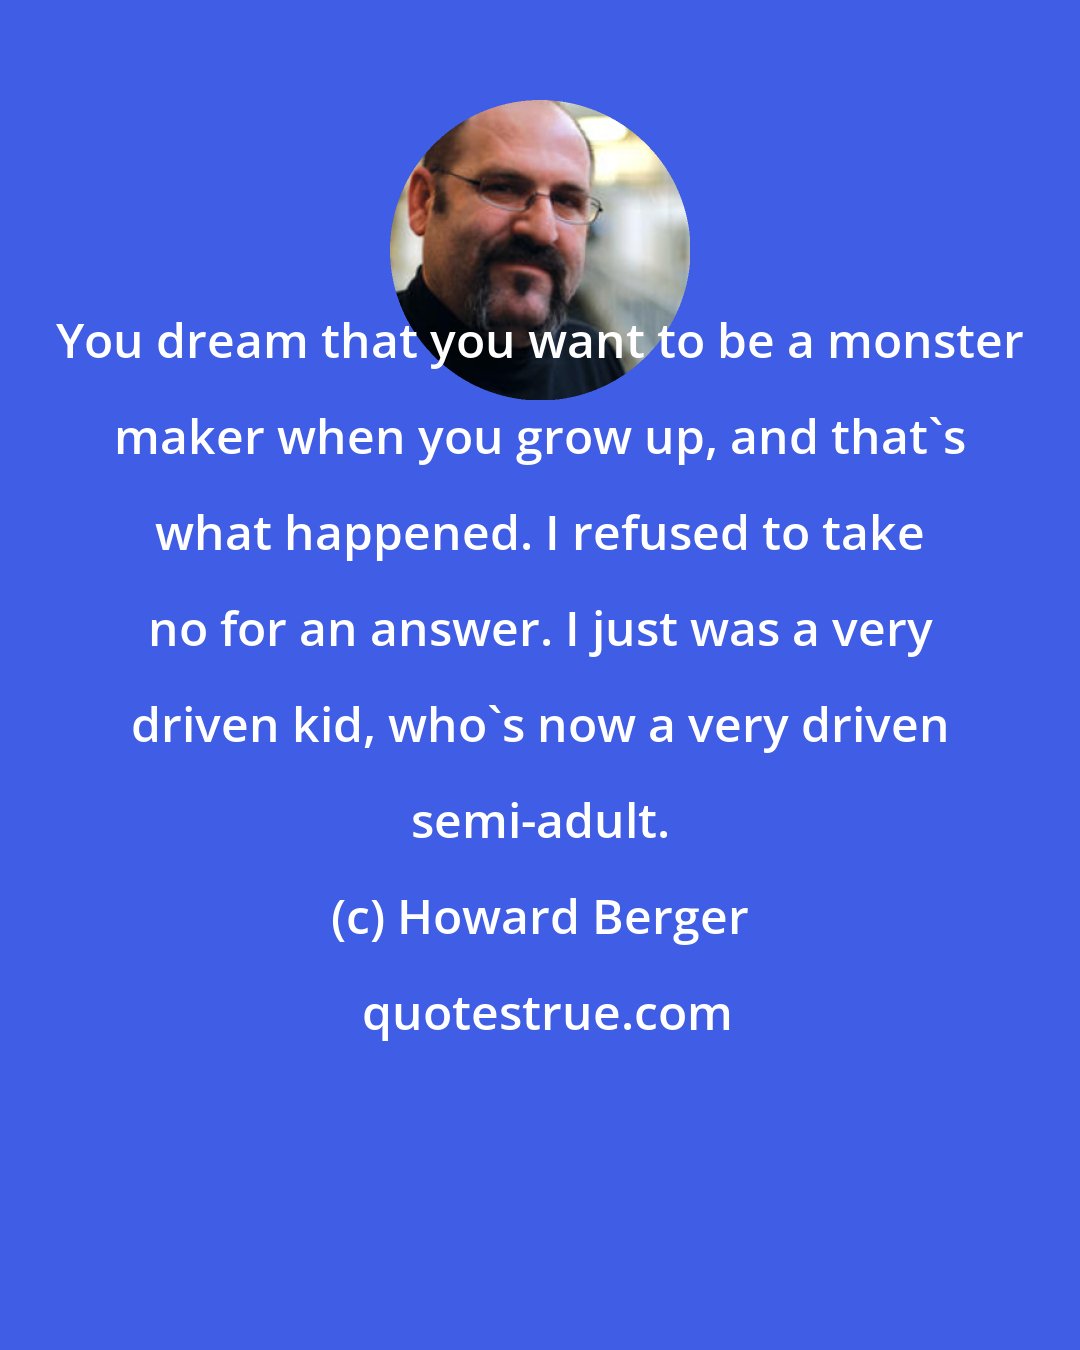 Howard Berger: You dream that you want to be a monster maker when you grow up, and that's what happened. I refused to take no for an answer. I just was a very driven kid, who's now a very driven semi-adult.